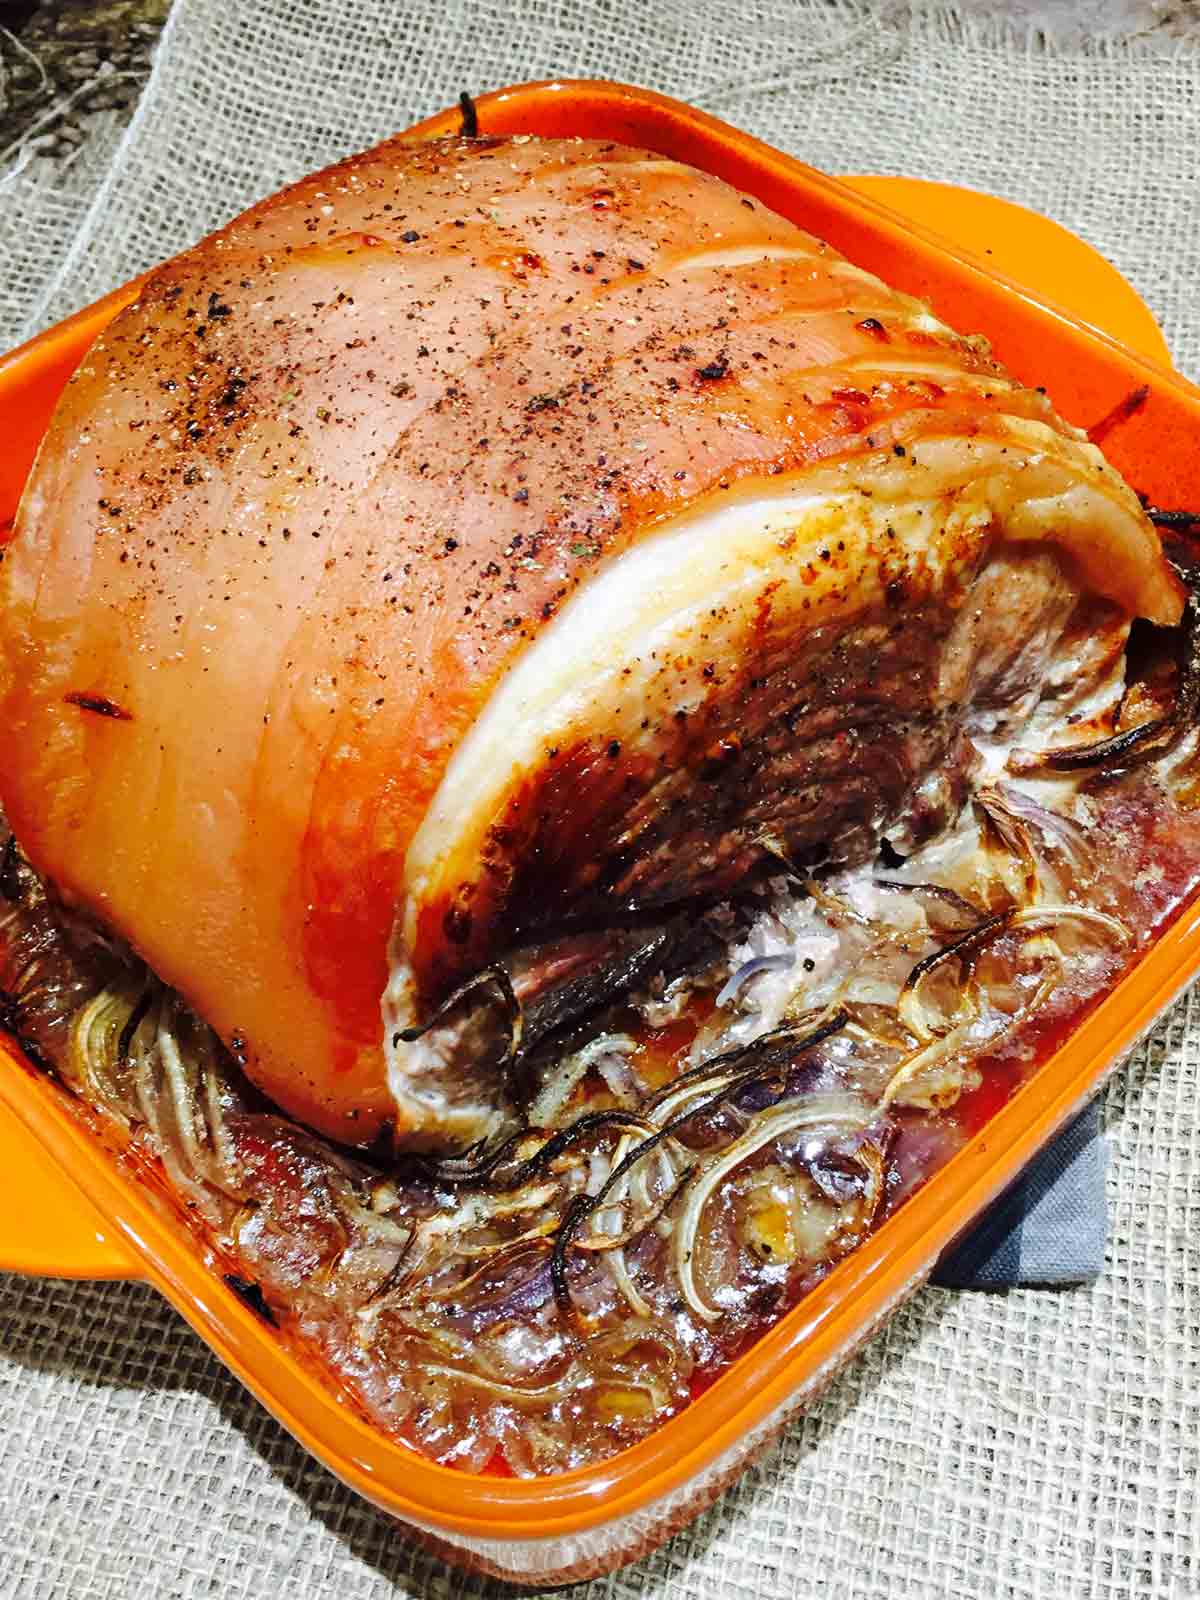 A chunky piece of roast pork, on a bed of beer and onions.